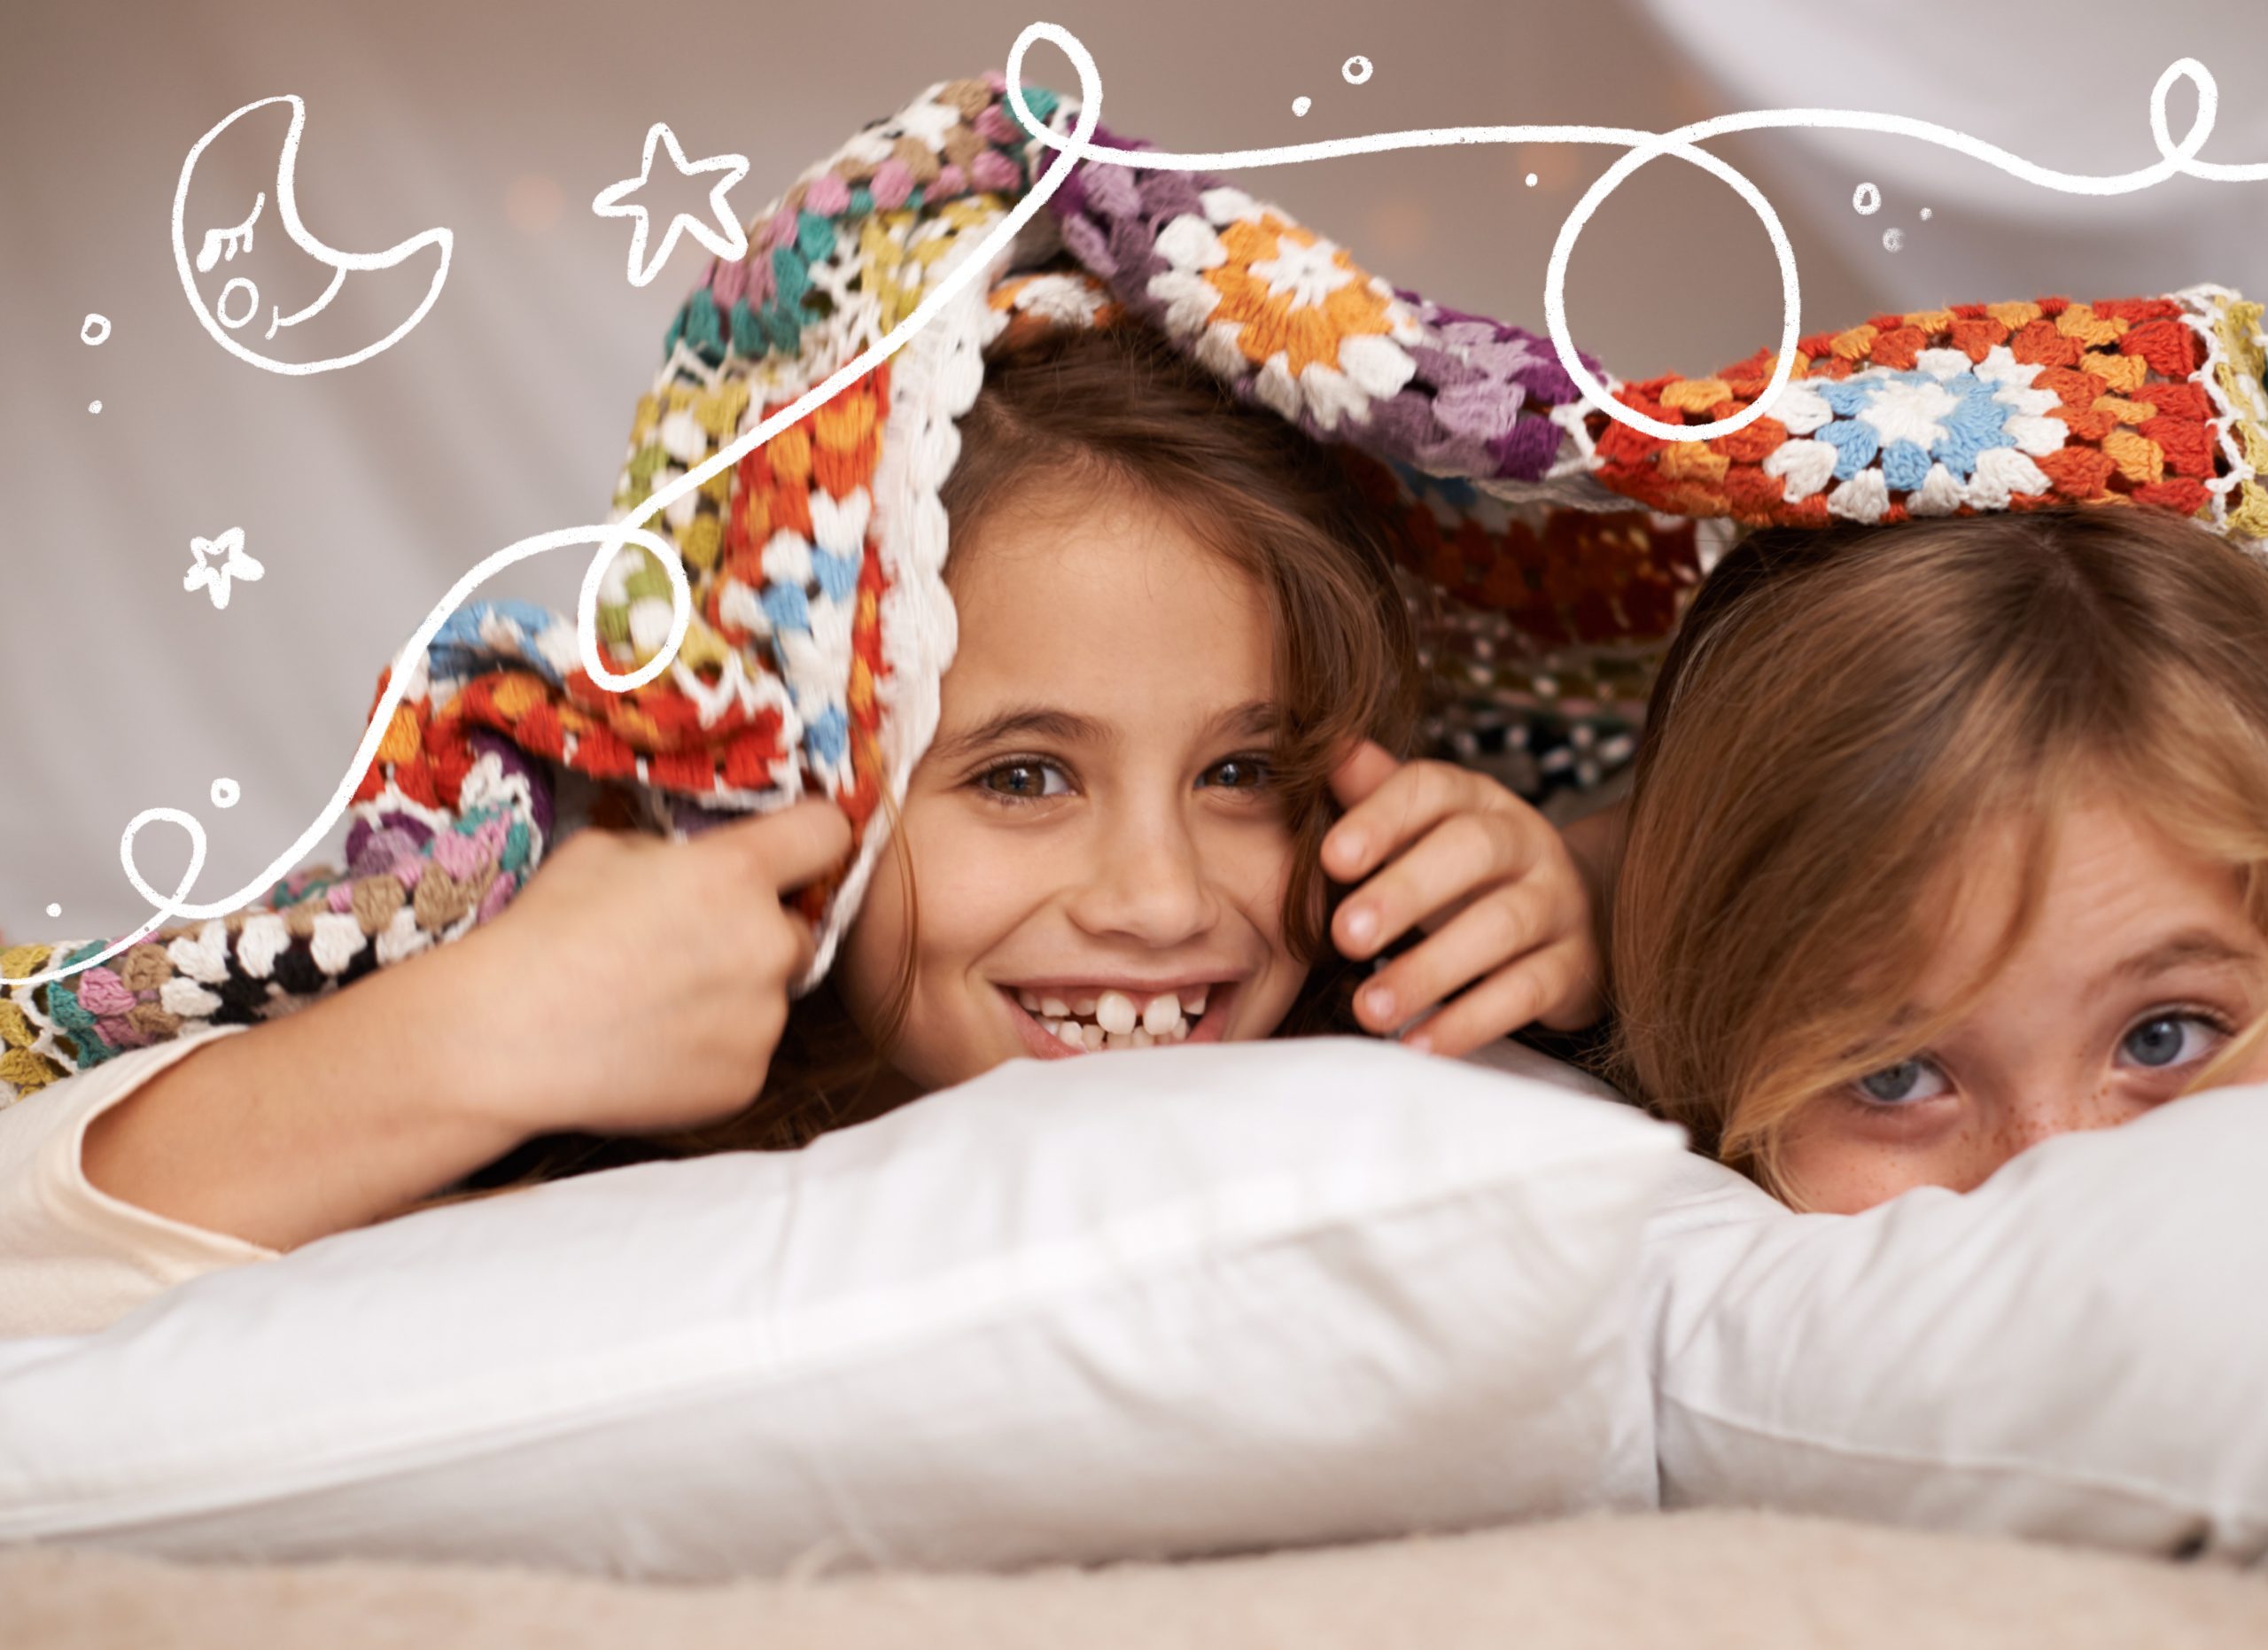 What To Pack for Your Child's Sleepover (It's Probably Less Than You Think)